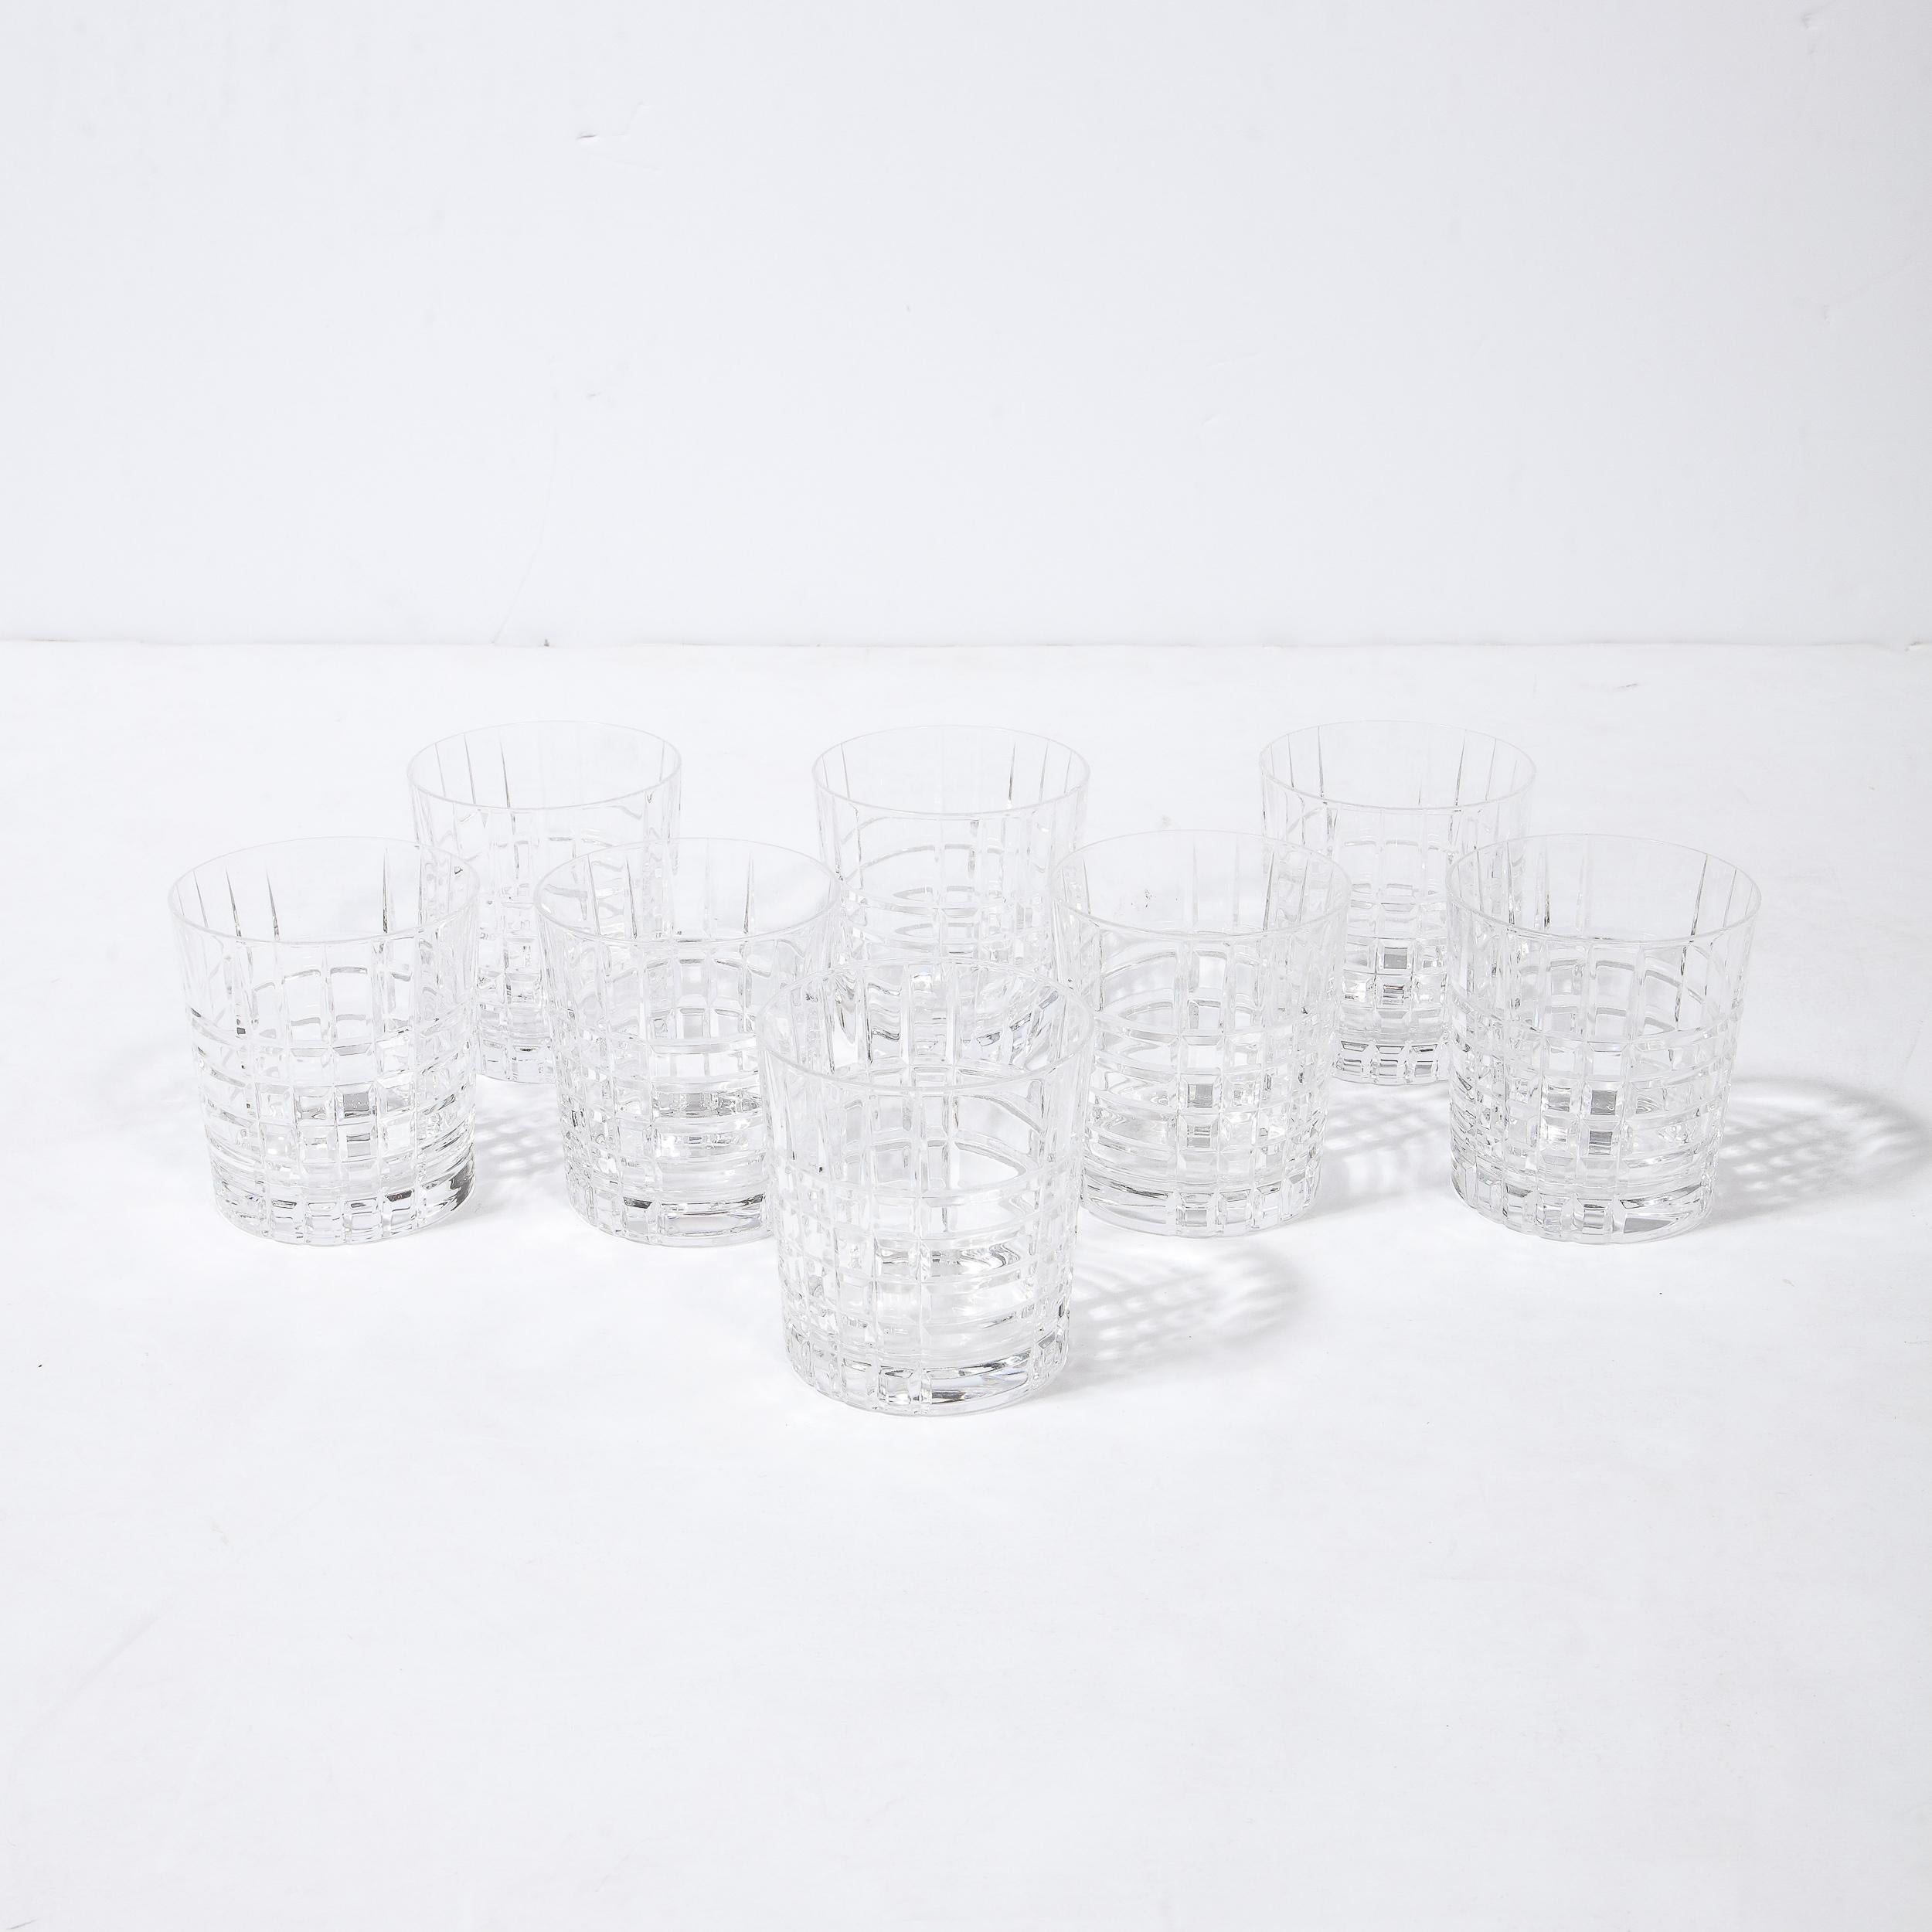 American Set of 8 Modernist Square Plaid Crystal Drink Glasses/ Tumblers by Tiffany & Co.